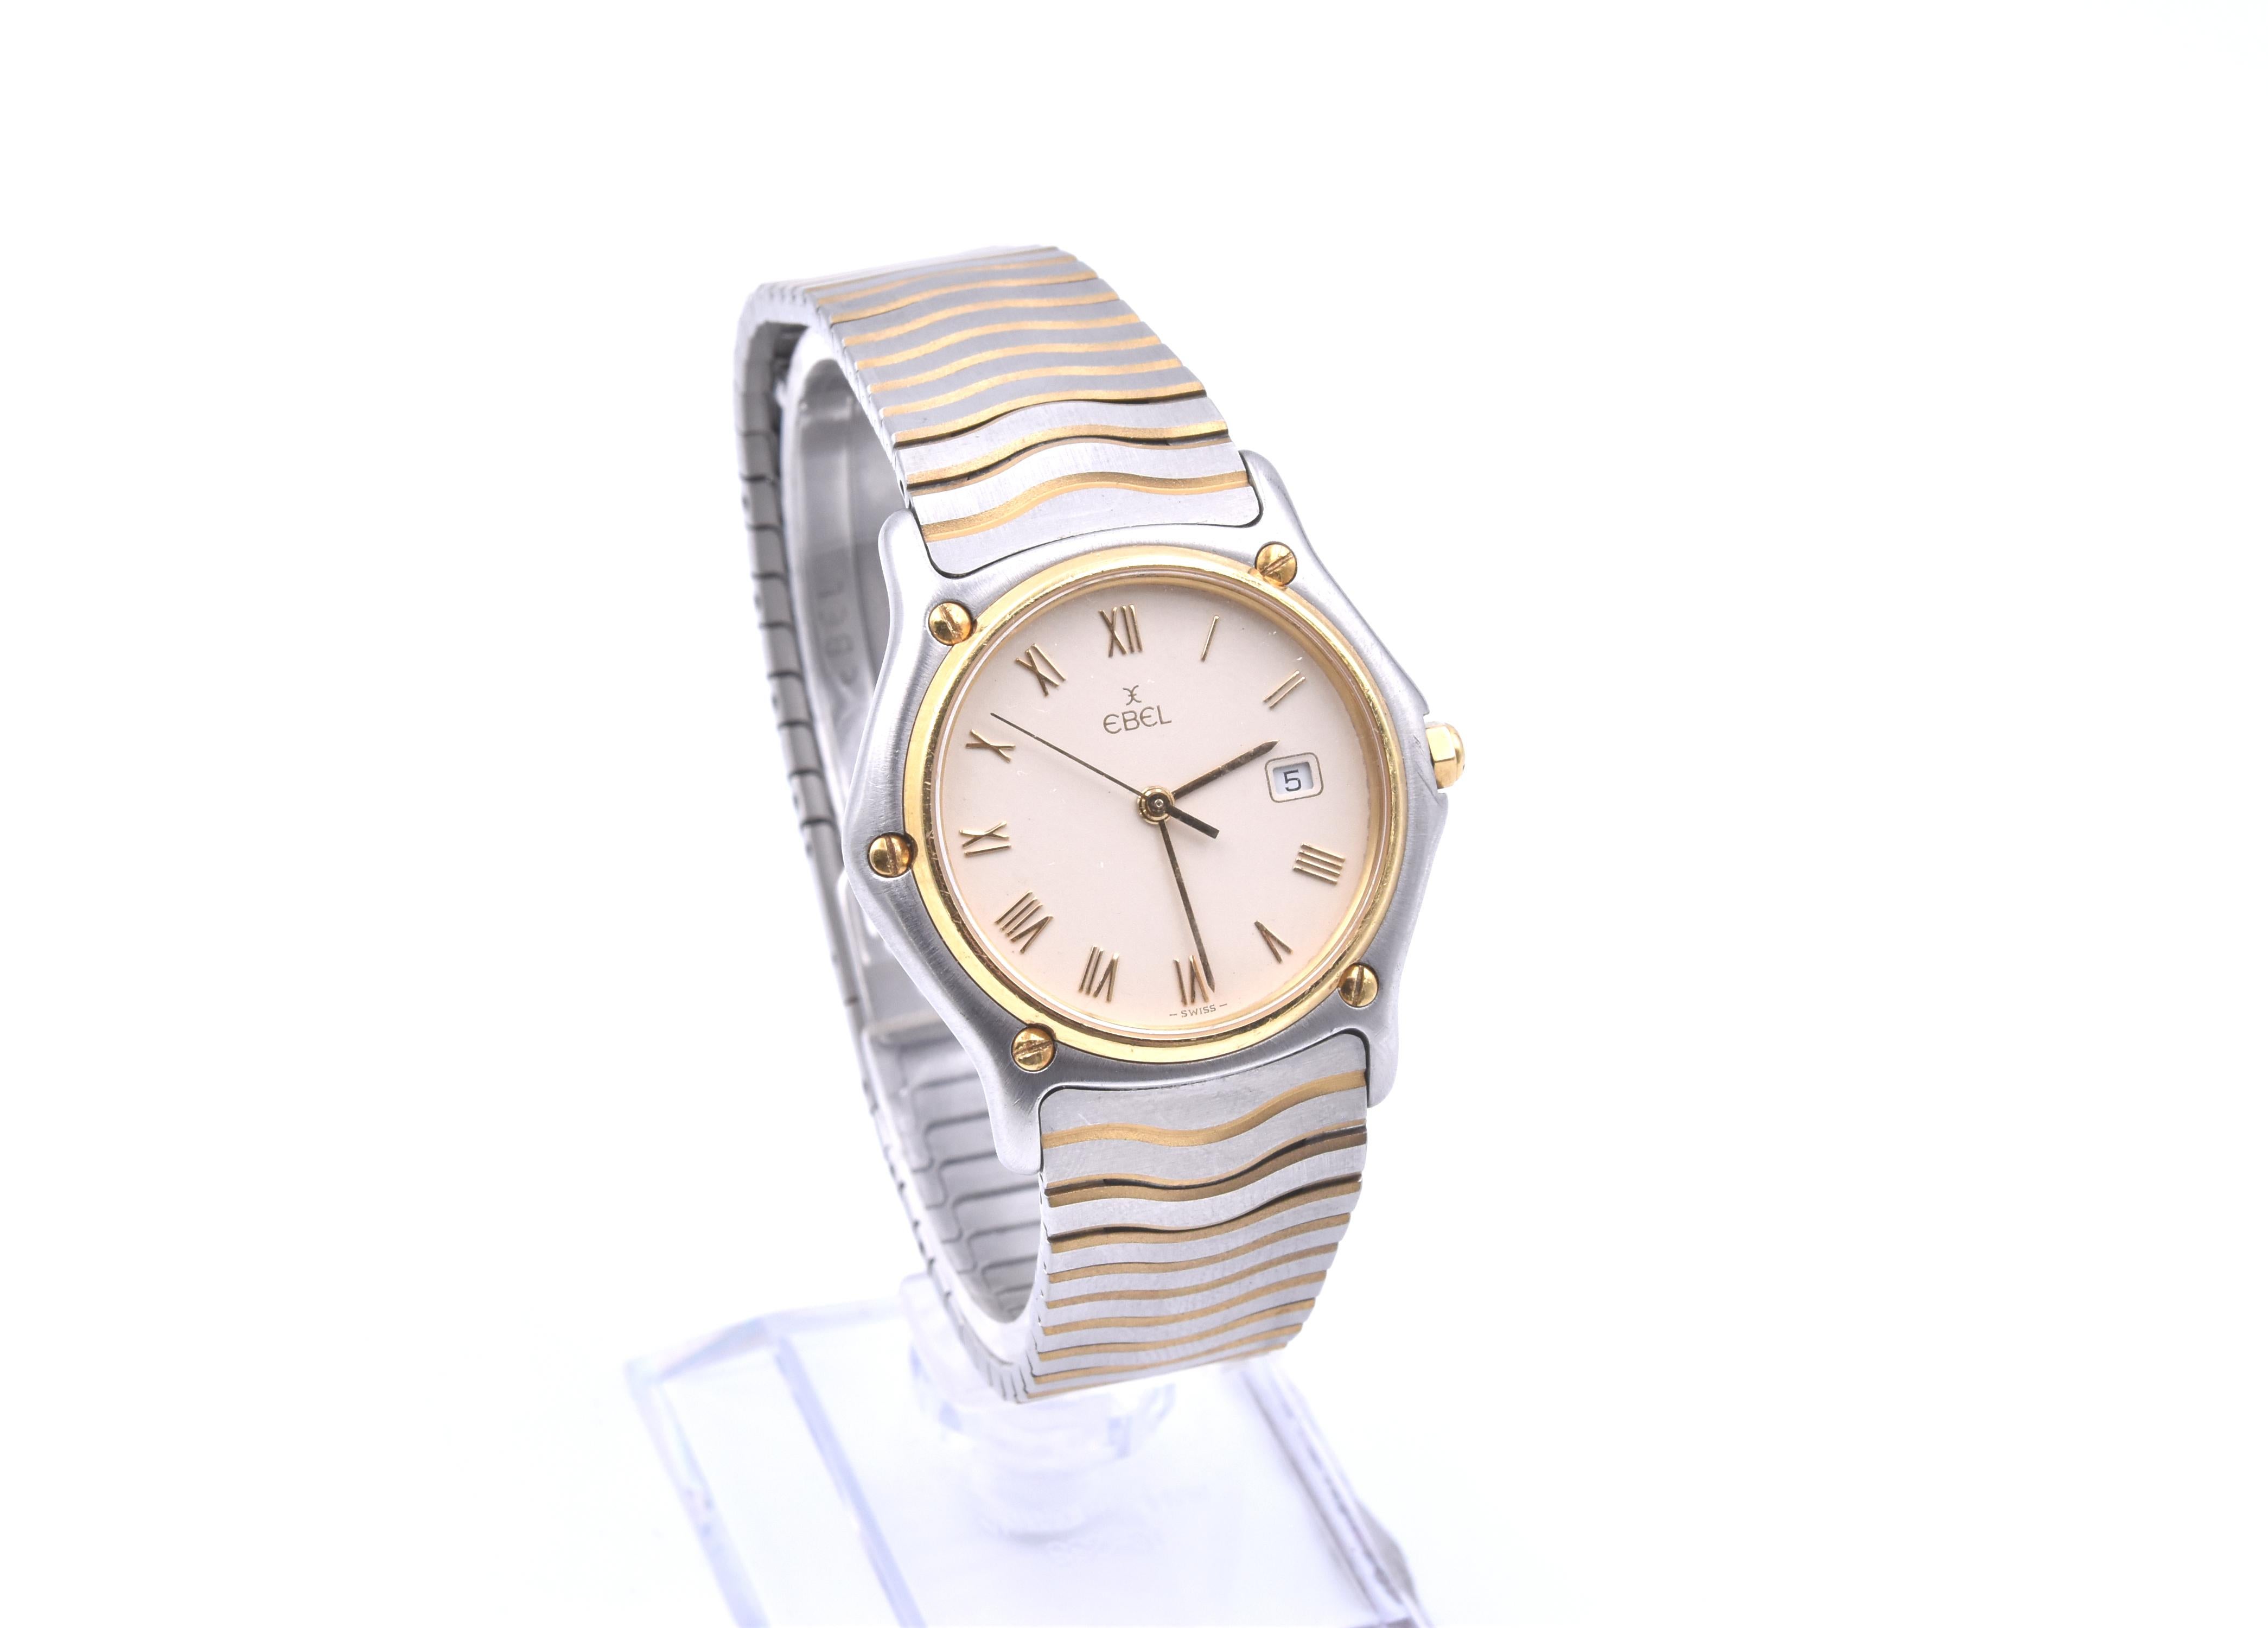 Movement: quartz
Function: hours, minutes, seconds, date
Case: 32mm stainless steel case, sapphire crystal, yellow gold smooth bezel, push/pull crown
Band: Ebel two tone wave bracelet, deployment clasp
Dial: cream dial, date at 3 o’clock, gold